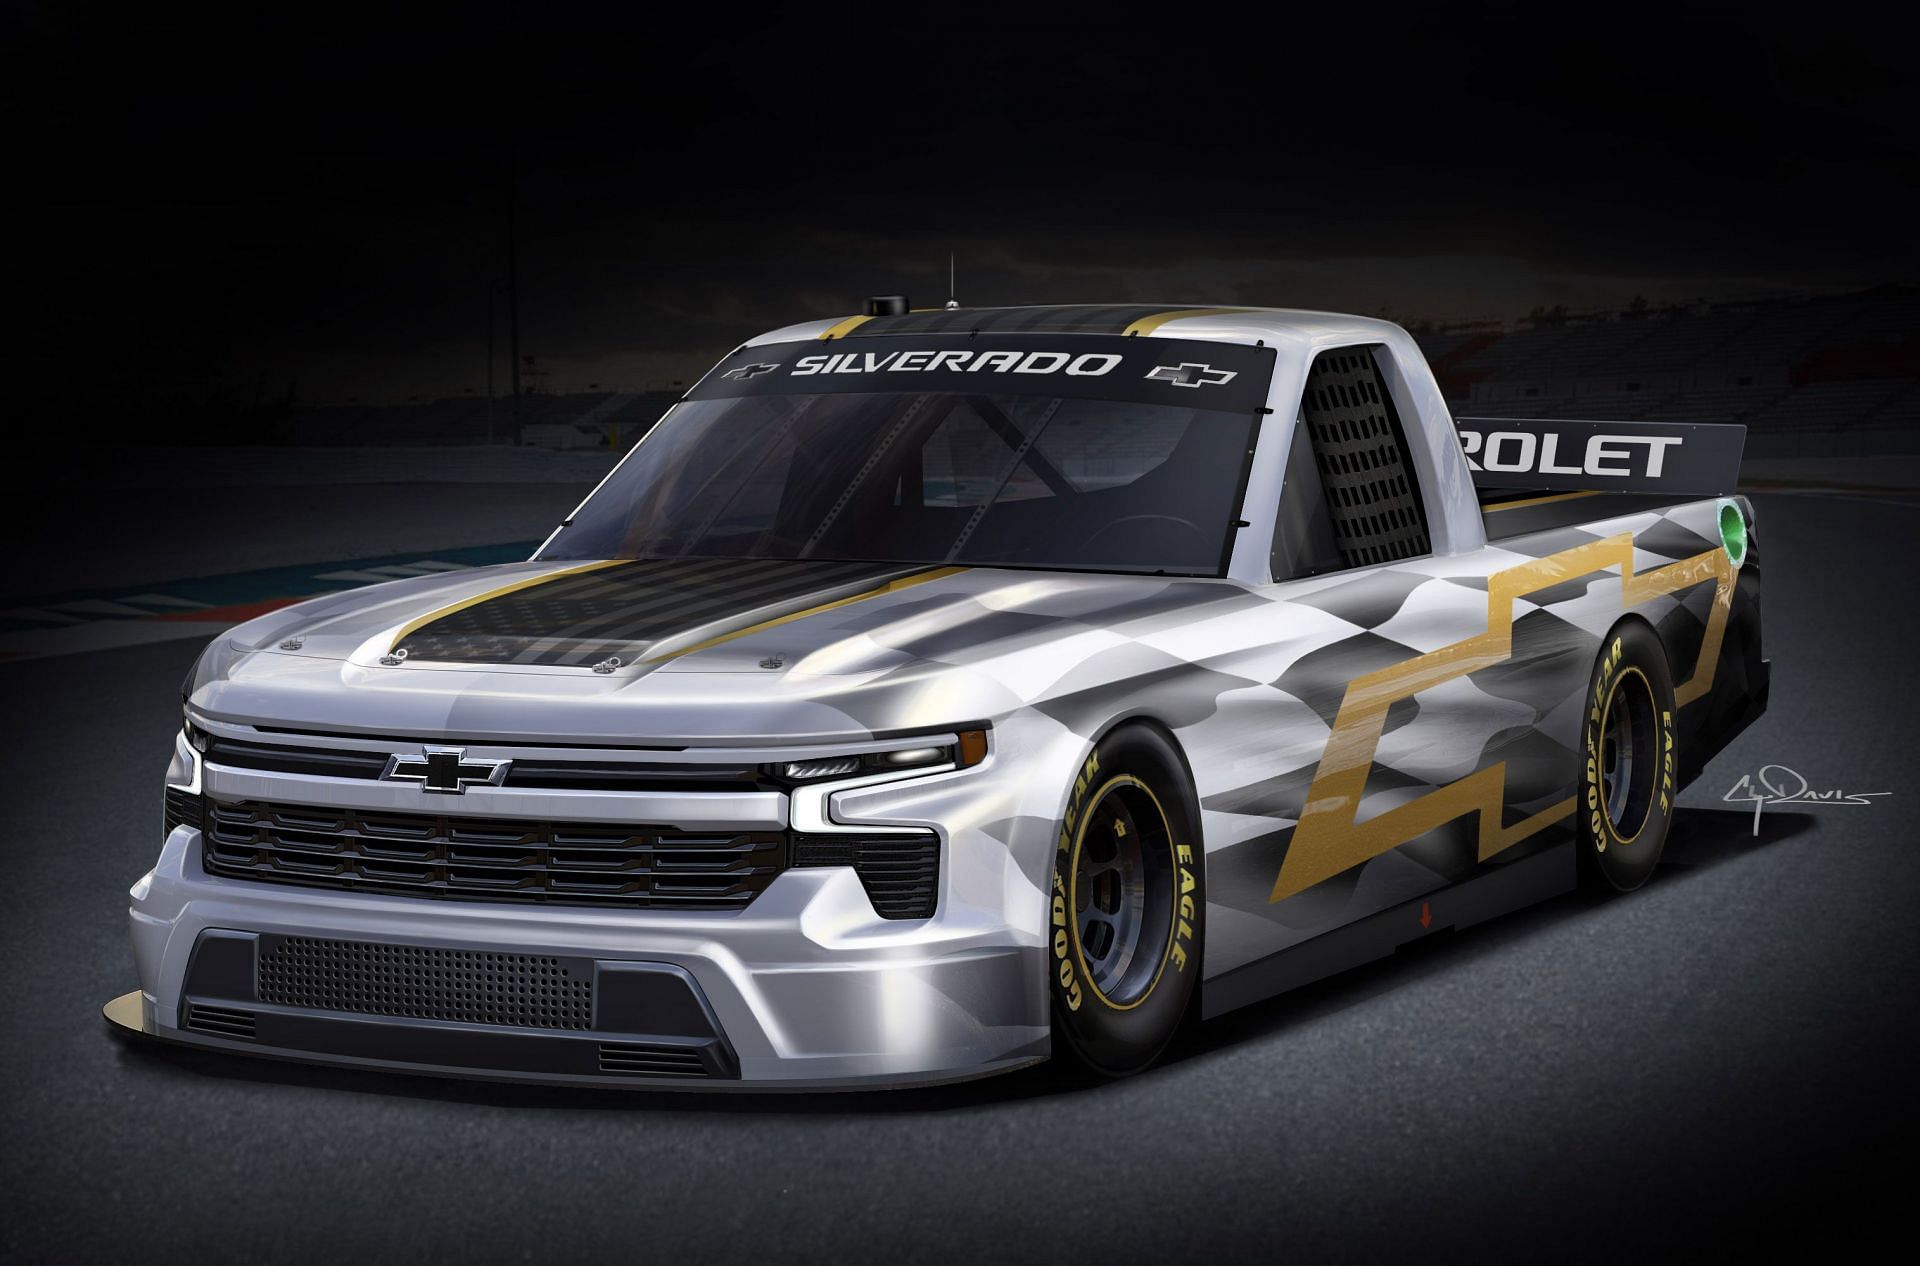 The redesigned Chevrolet Silverado RST will hit the track in the NASCAR Truck Series for the first time during Speedweeks at Daytona International Speedway next February. Photo courtesy of Team Chevy, used with permission.